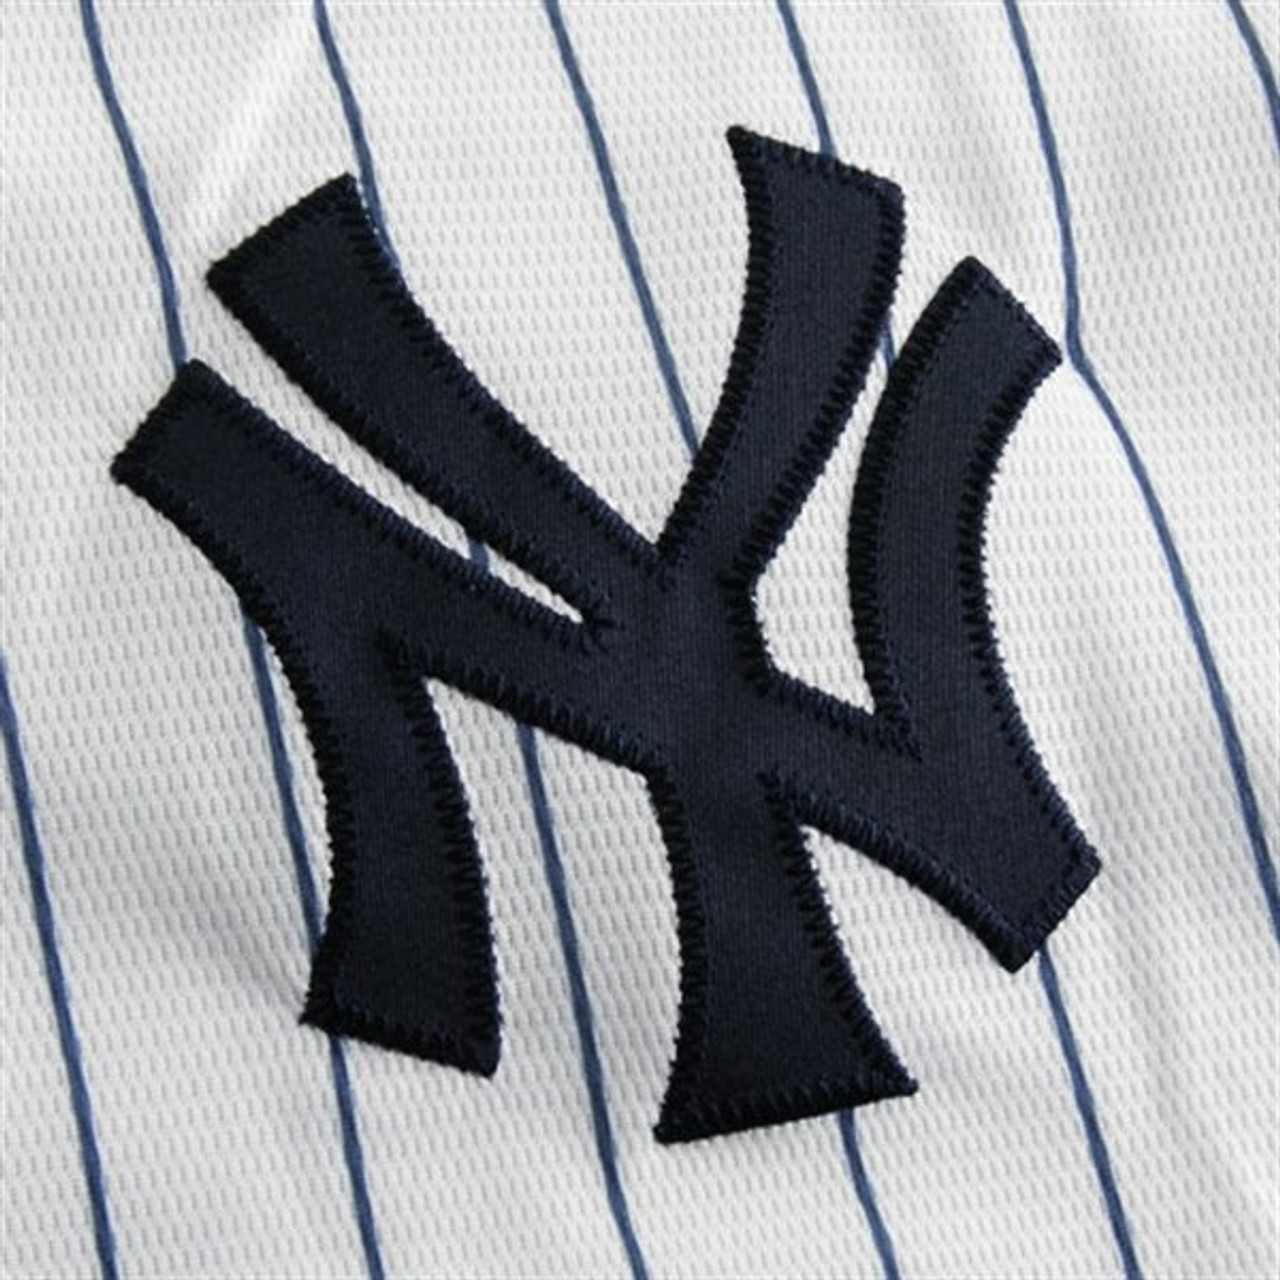 Derek Jeter No Name Jersey - Yankees Replica Home Number Only Jersey